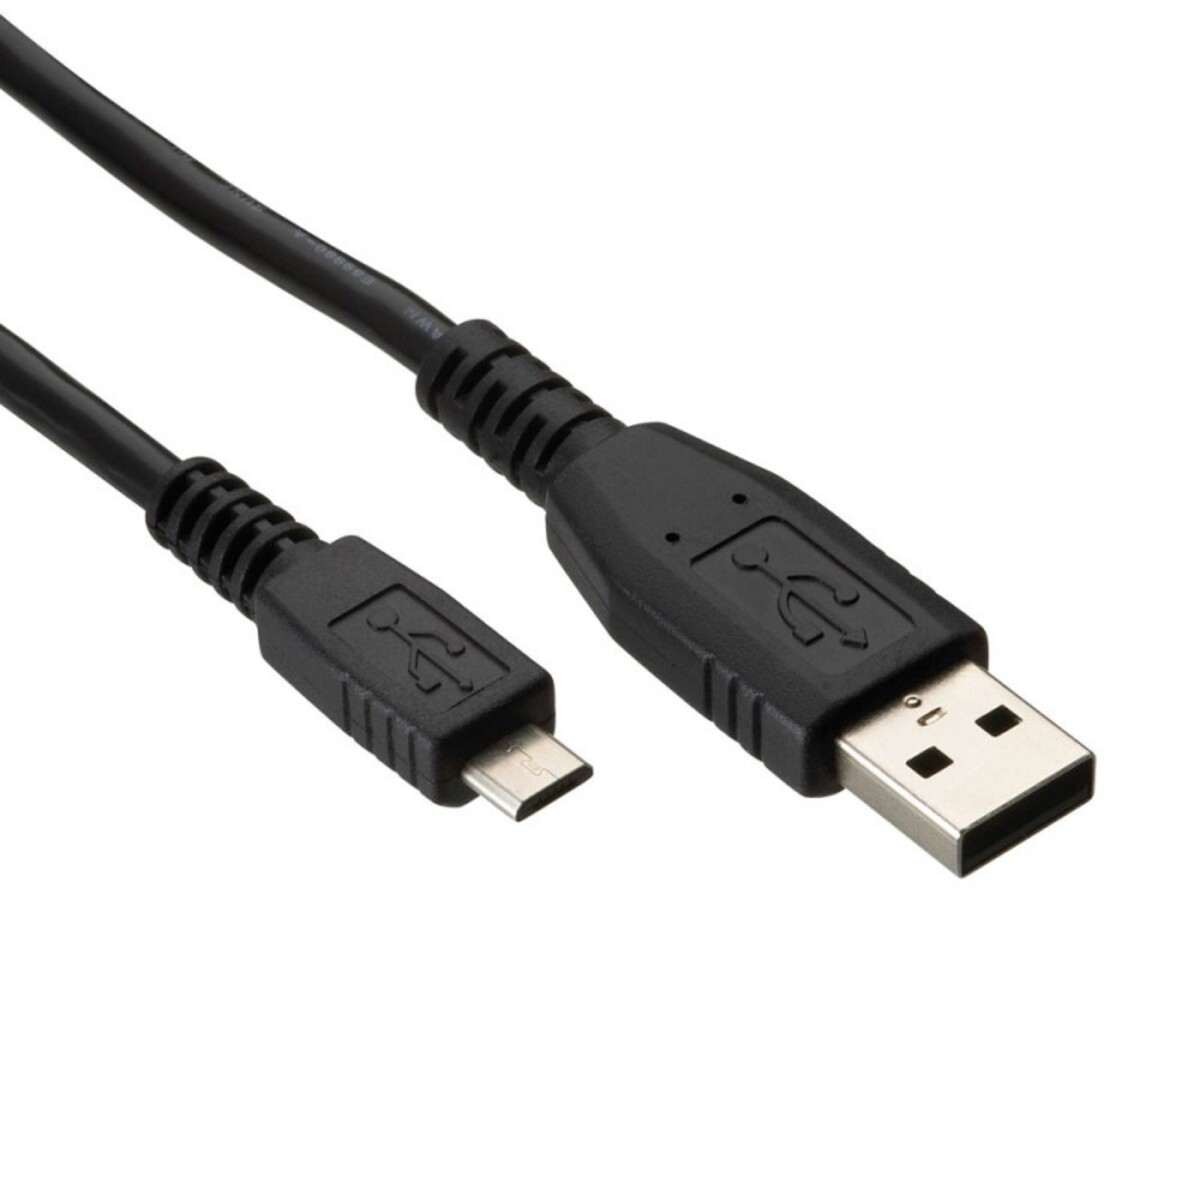 Trands Type-C to 3.5mm Male Aux Audio Cable AU1941 Online at Best Price, Utility Cable